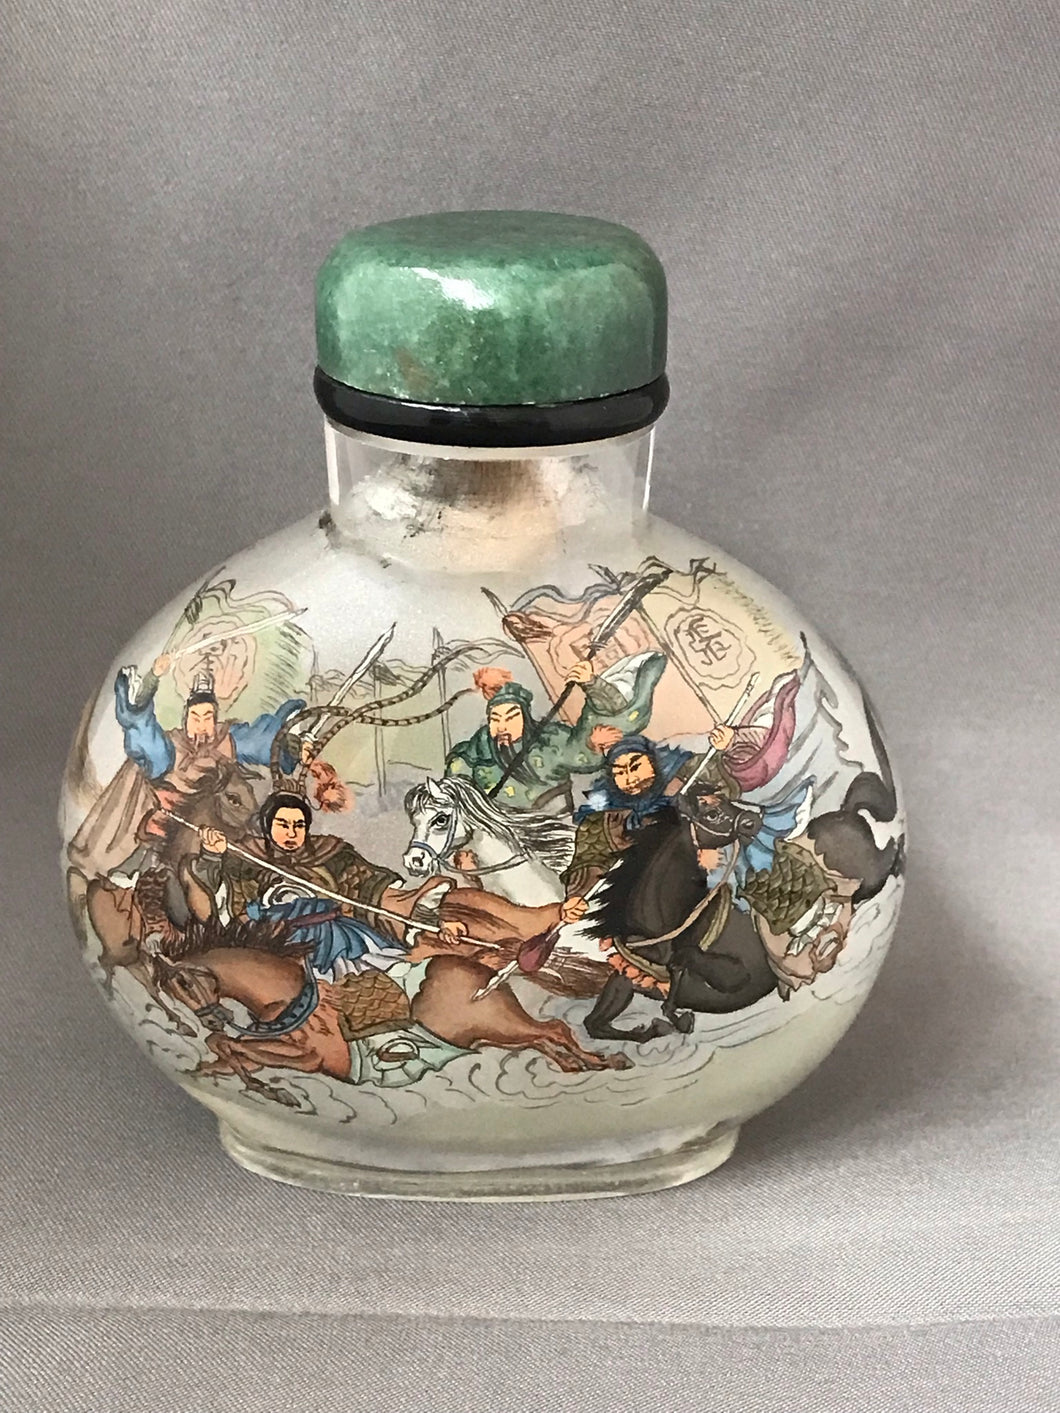 Inside Painted Snuff Bottle with Fighting Cavalary from the Romance of the Three Kingdoms